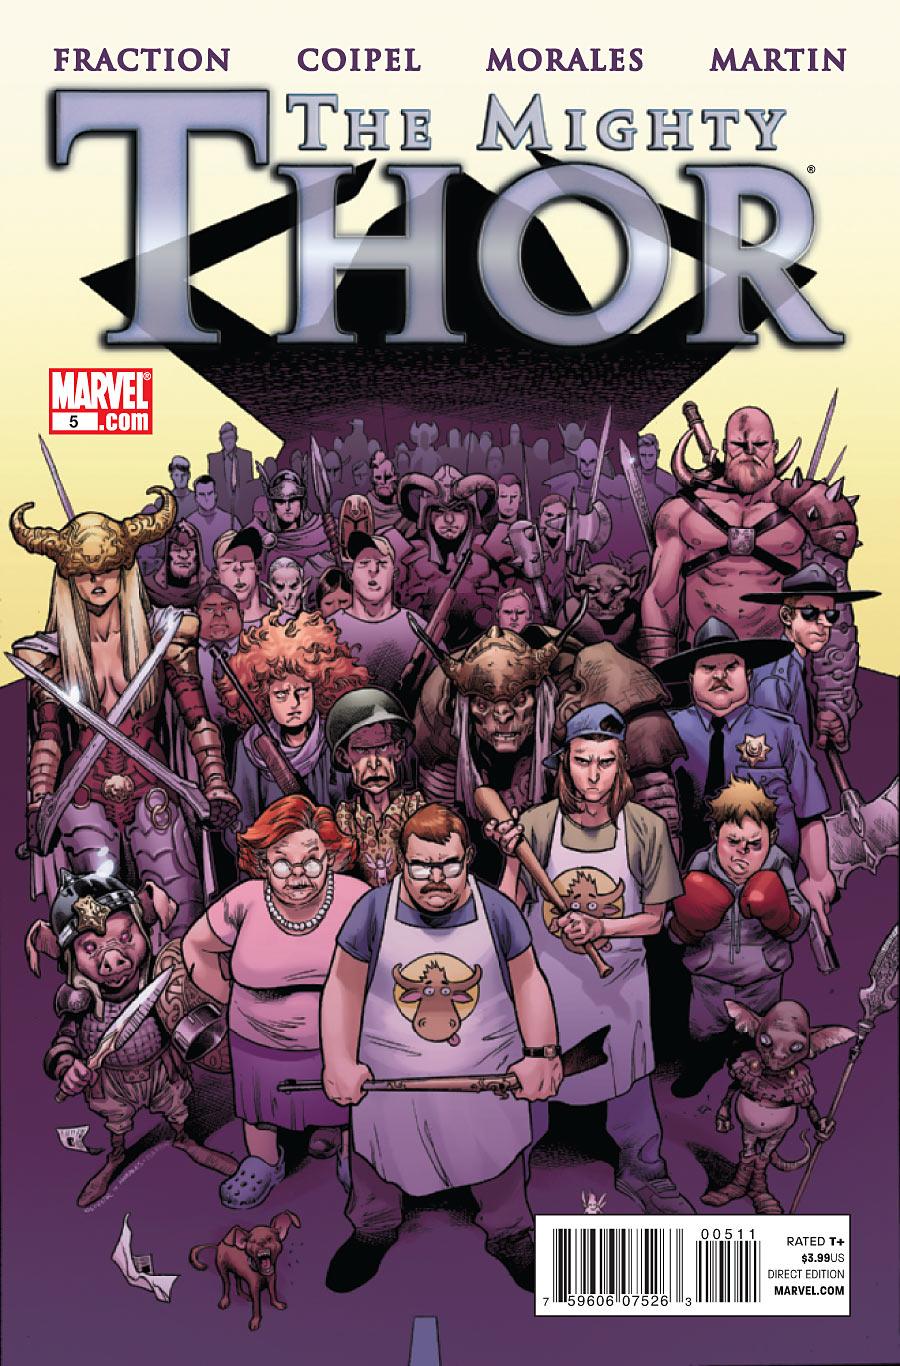 The Mighty Thor Vol. 1 #5